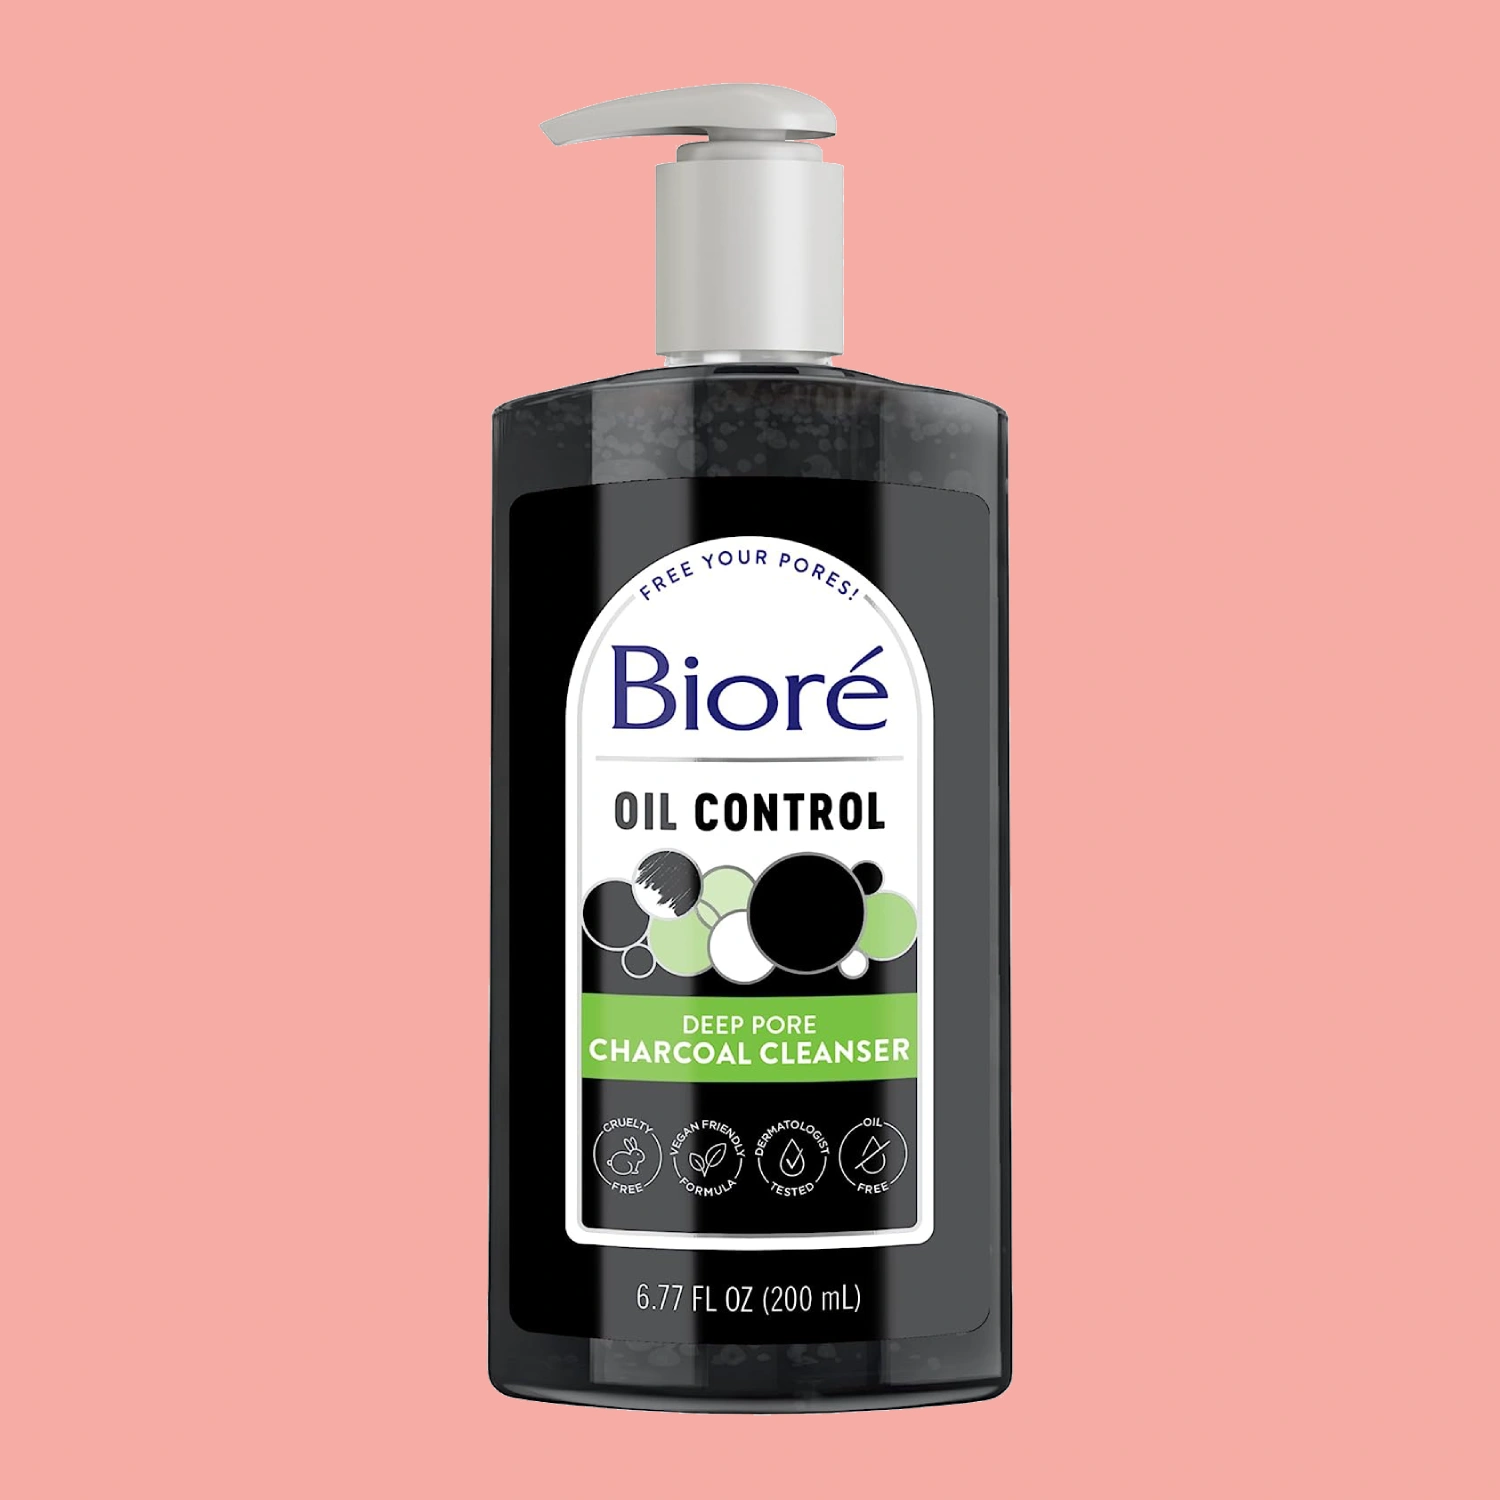 A bottle of Biore Deep Pore Charcoal Cleanser on a pink background